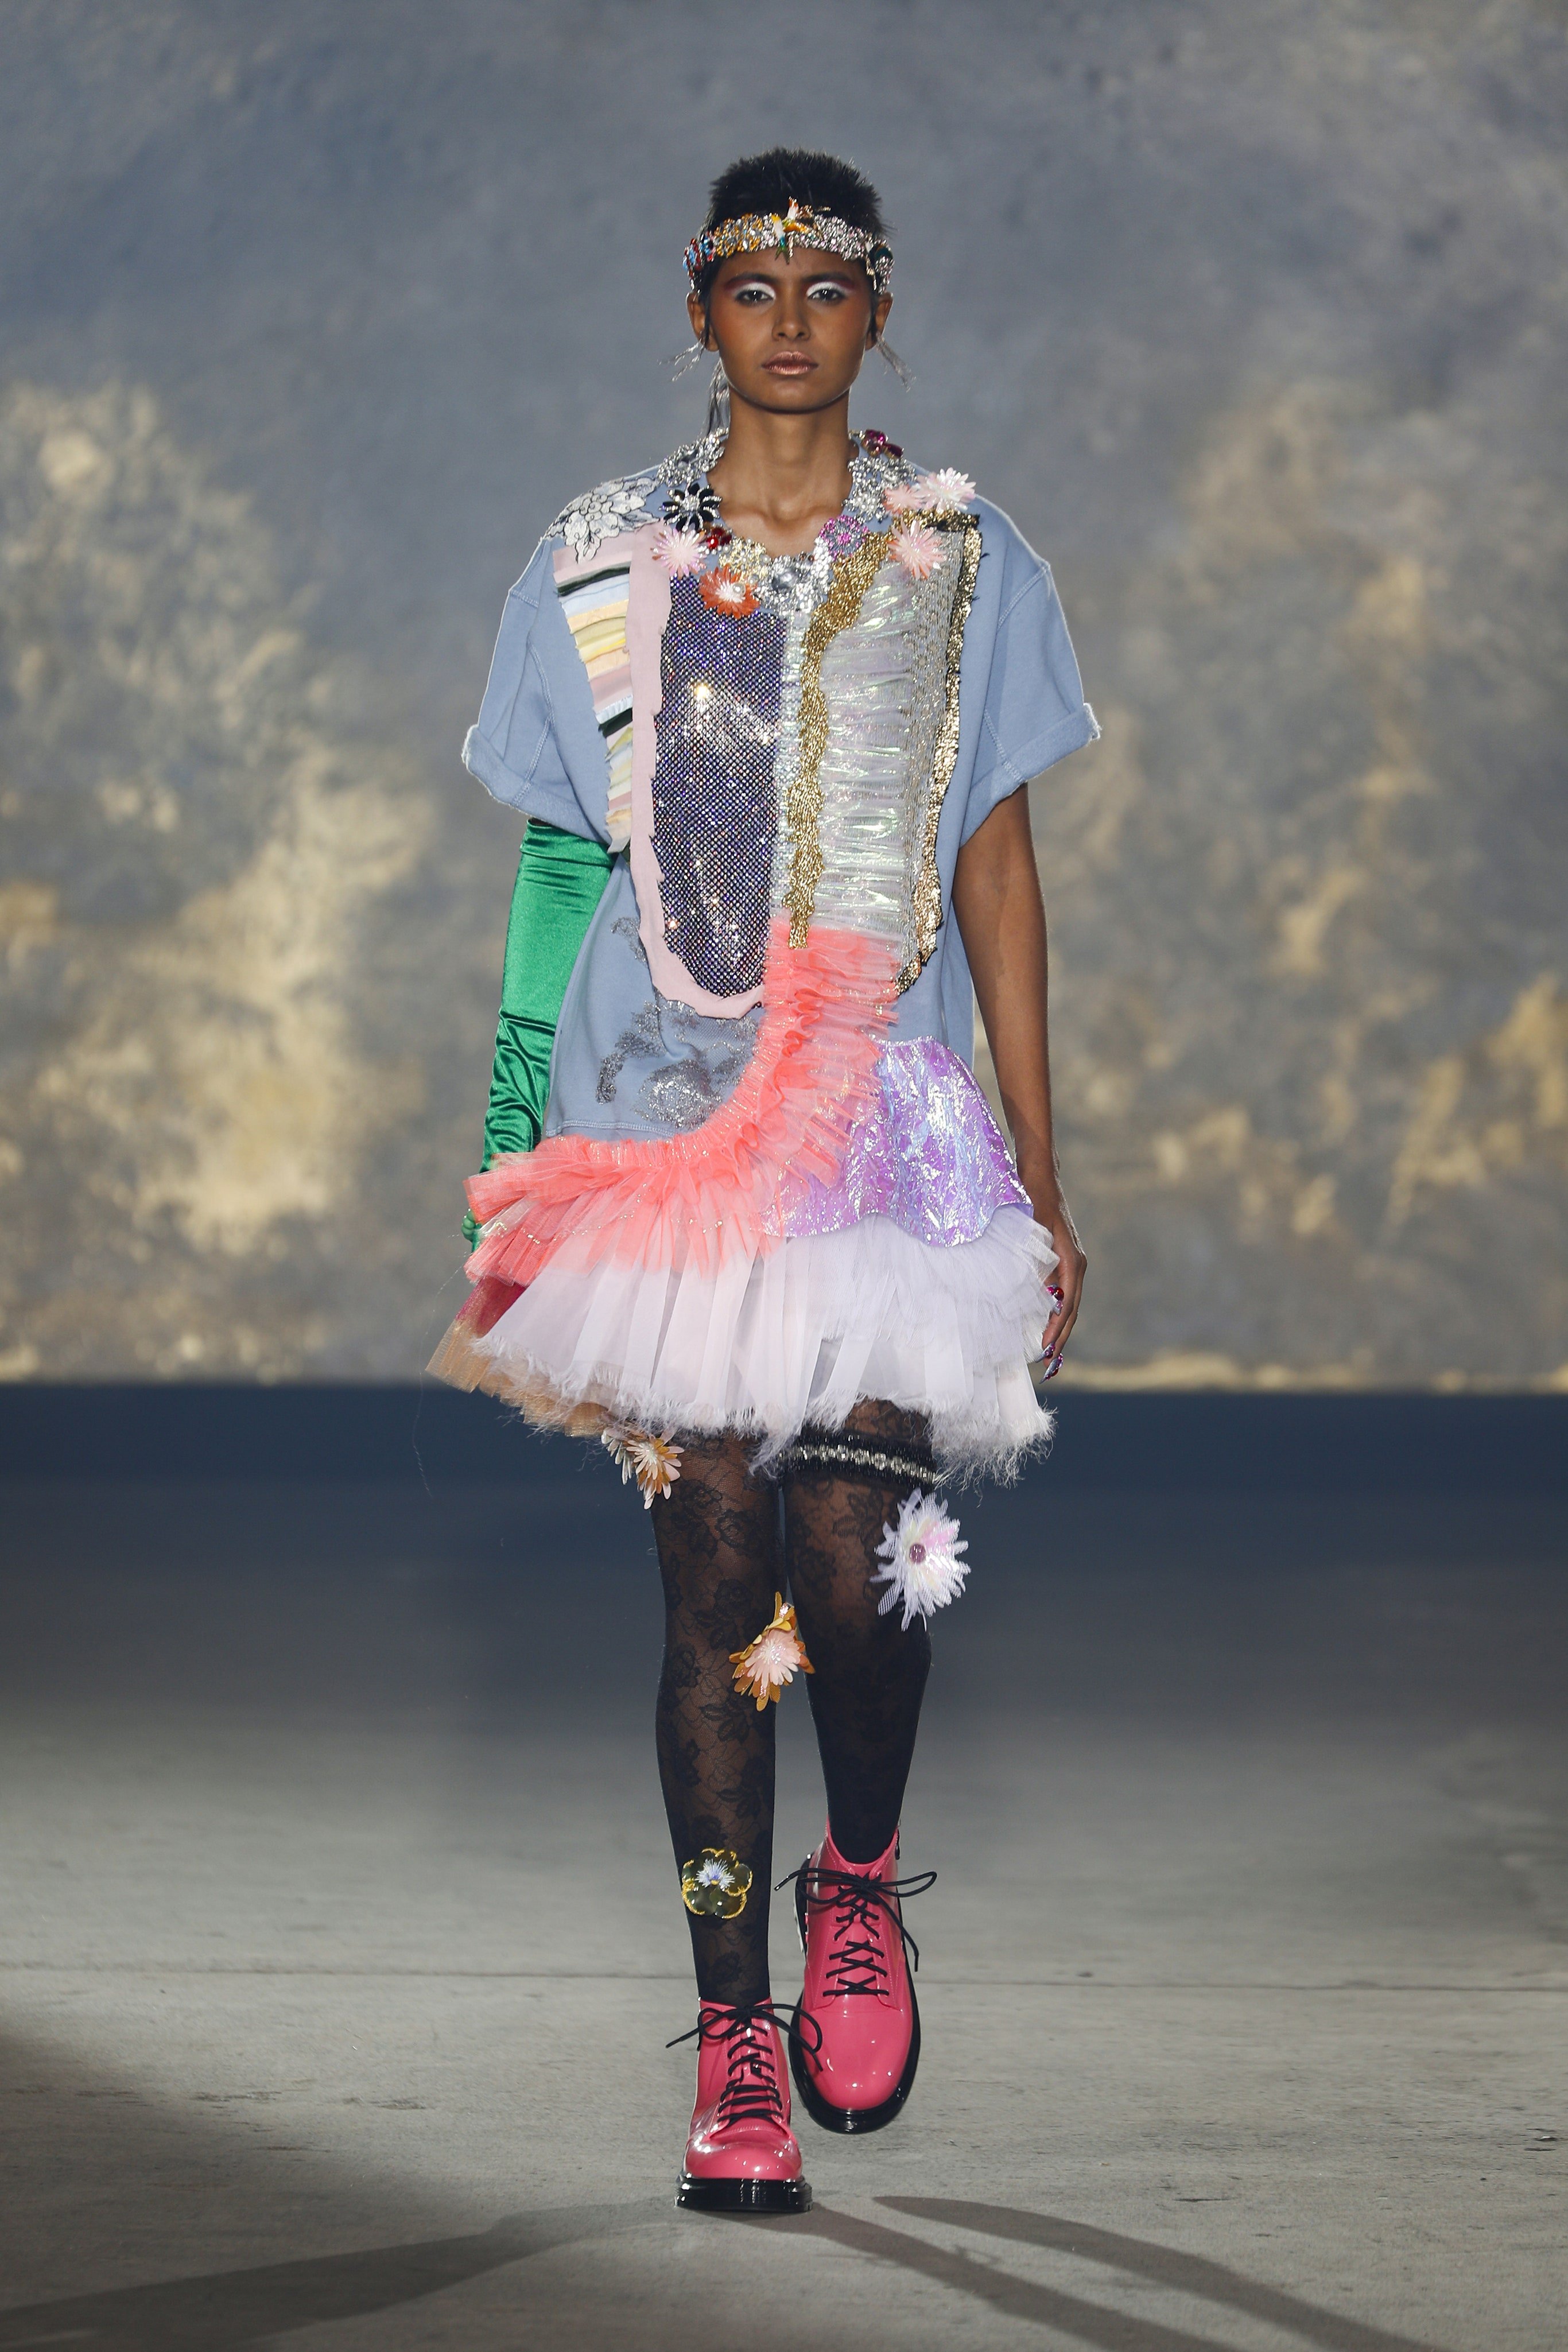 00014-Viktor-and-Rolf-Spring-21-Couture-Credit-Team-Peter-Stigter.jpg